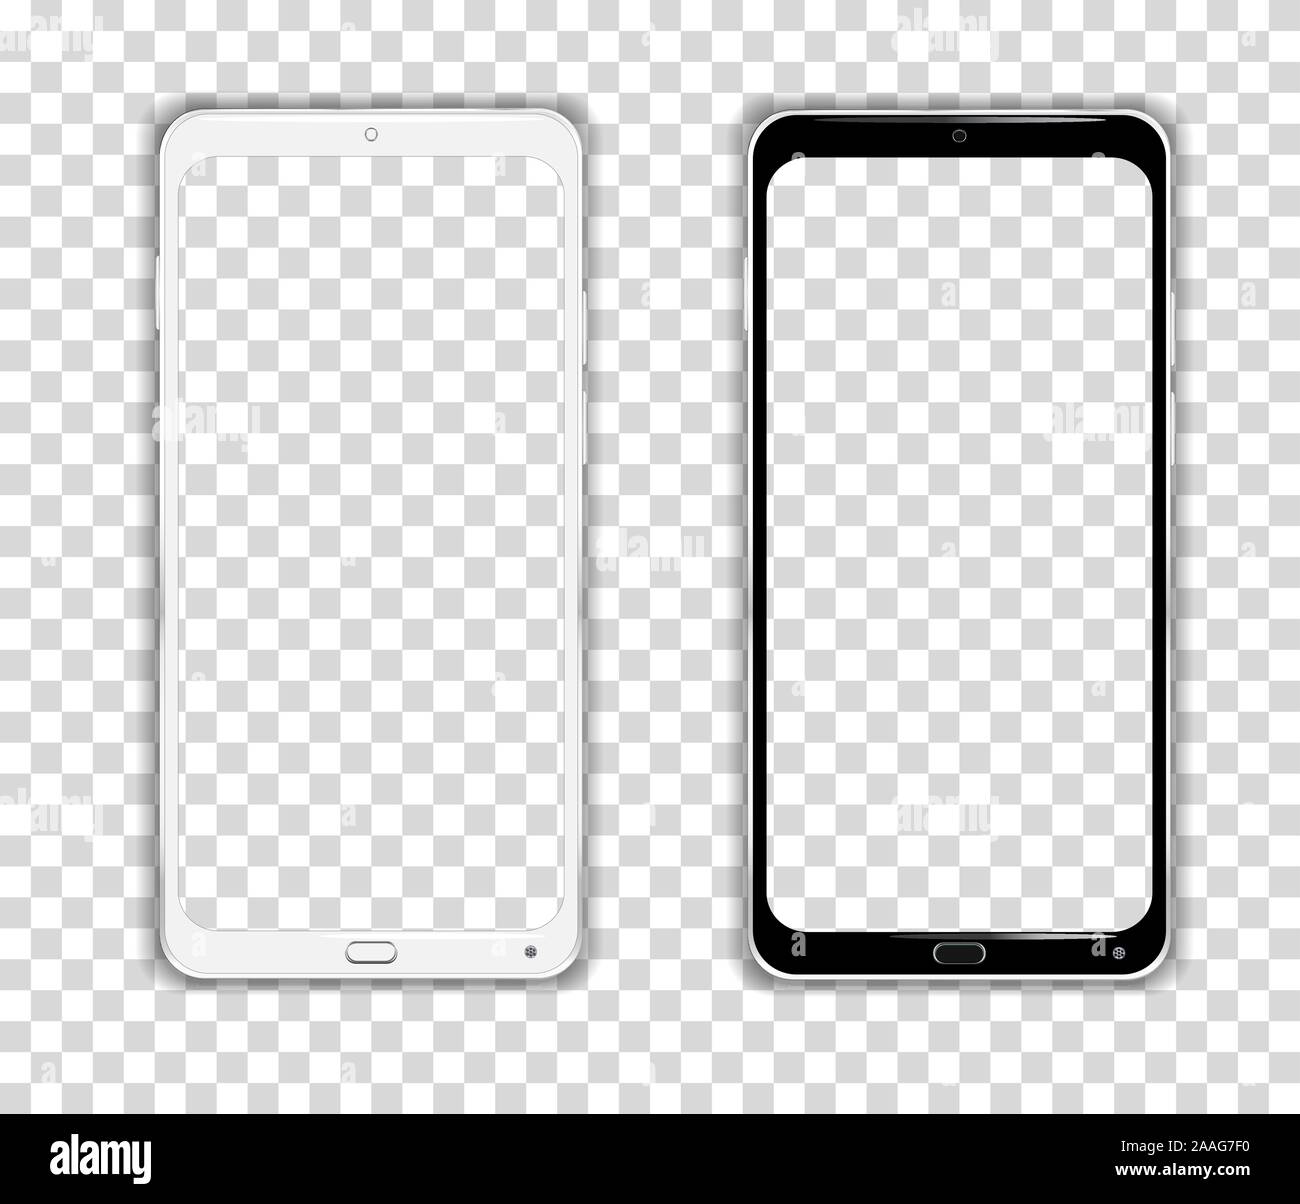 Realistic Cellphone Smartphone Vector of Touchscreen Android Phone frame device on a transparent Grid - fictitious generic design - Ideal to simply ad Stock Vector